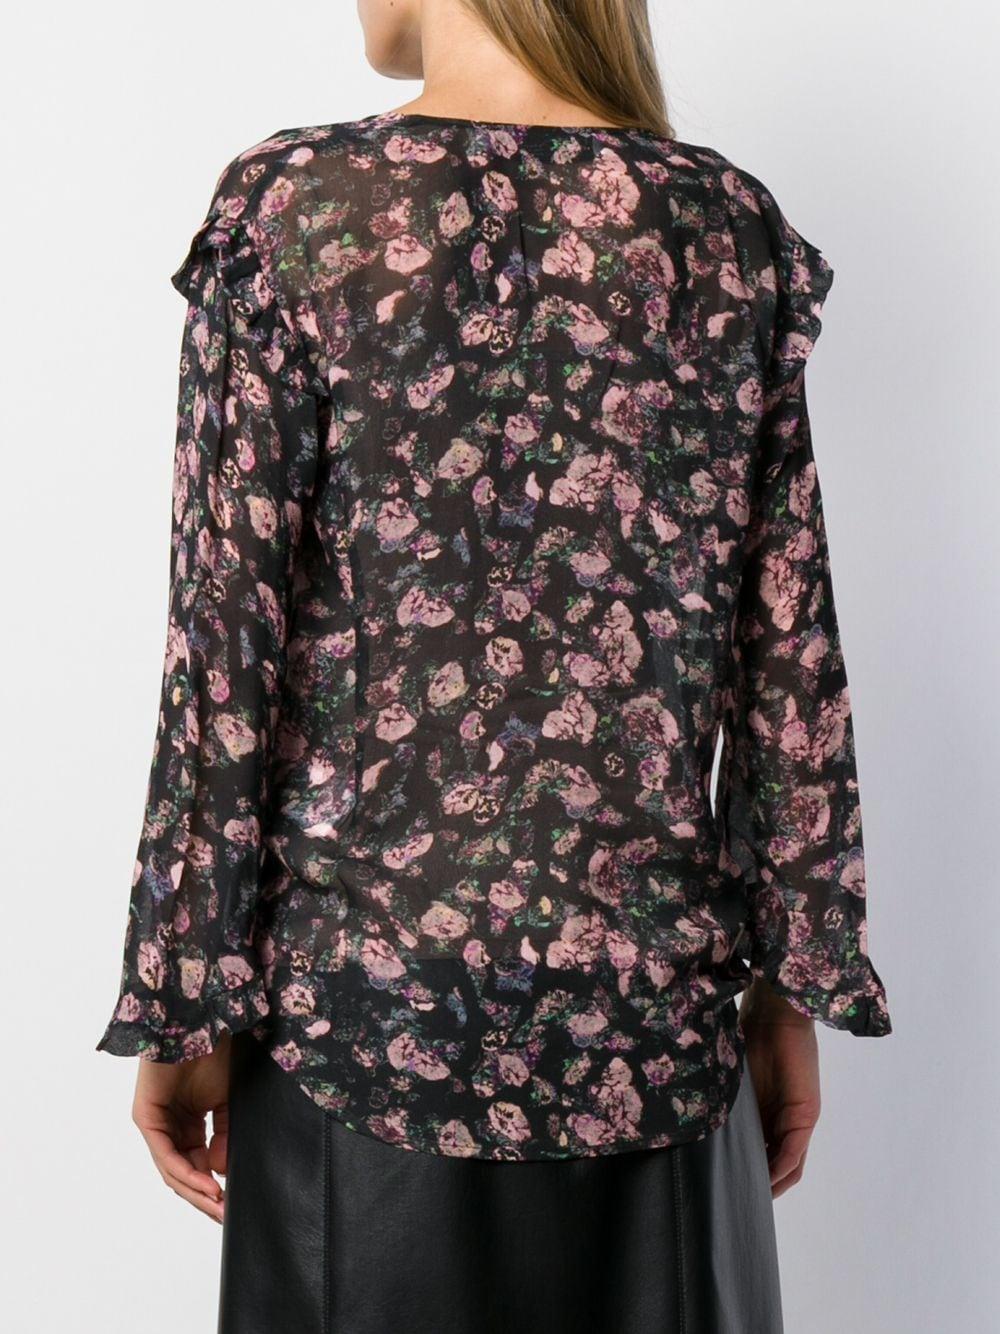 IRO Floral Print Blouse in Black - Lyst